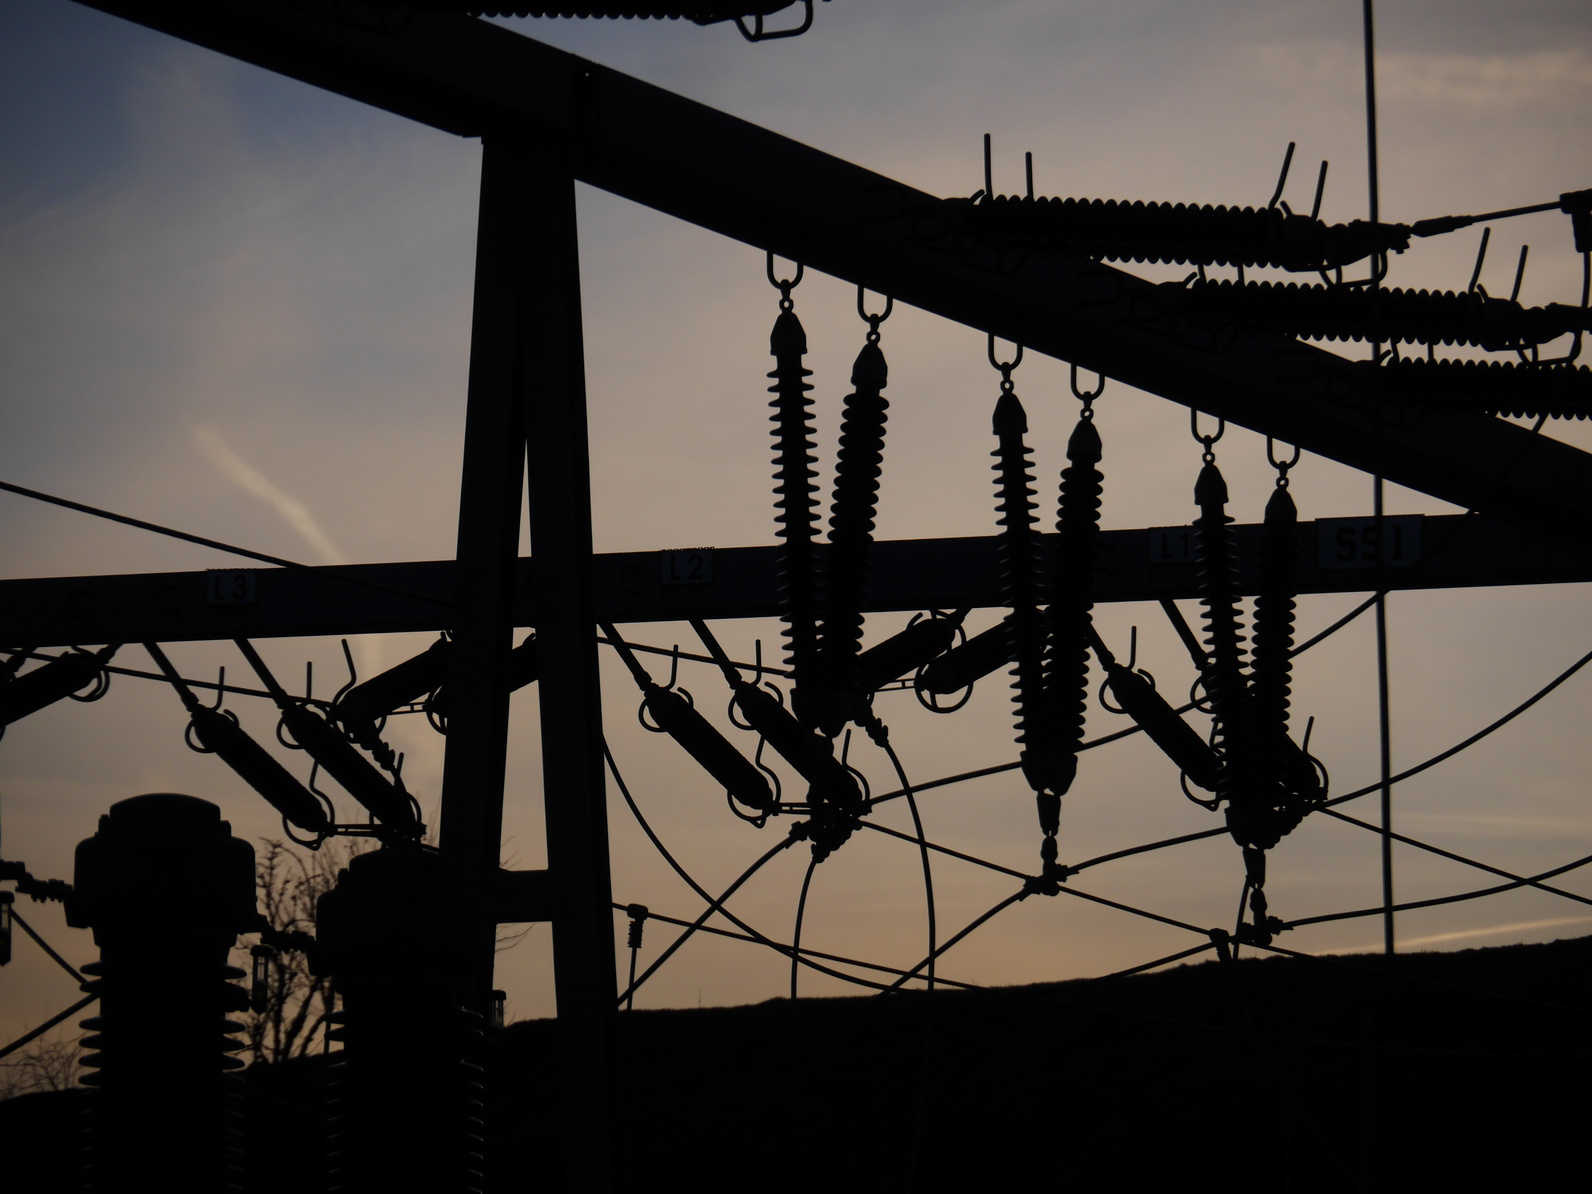 Electrical power grid in silhouette